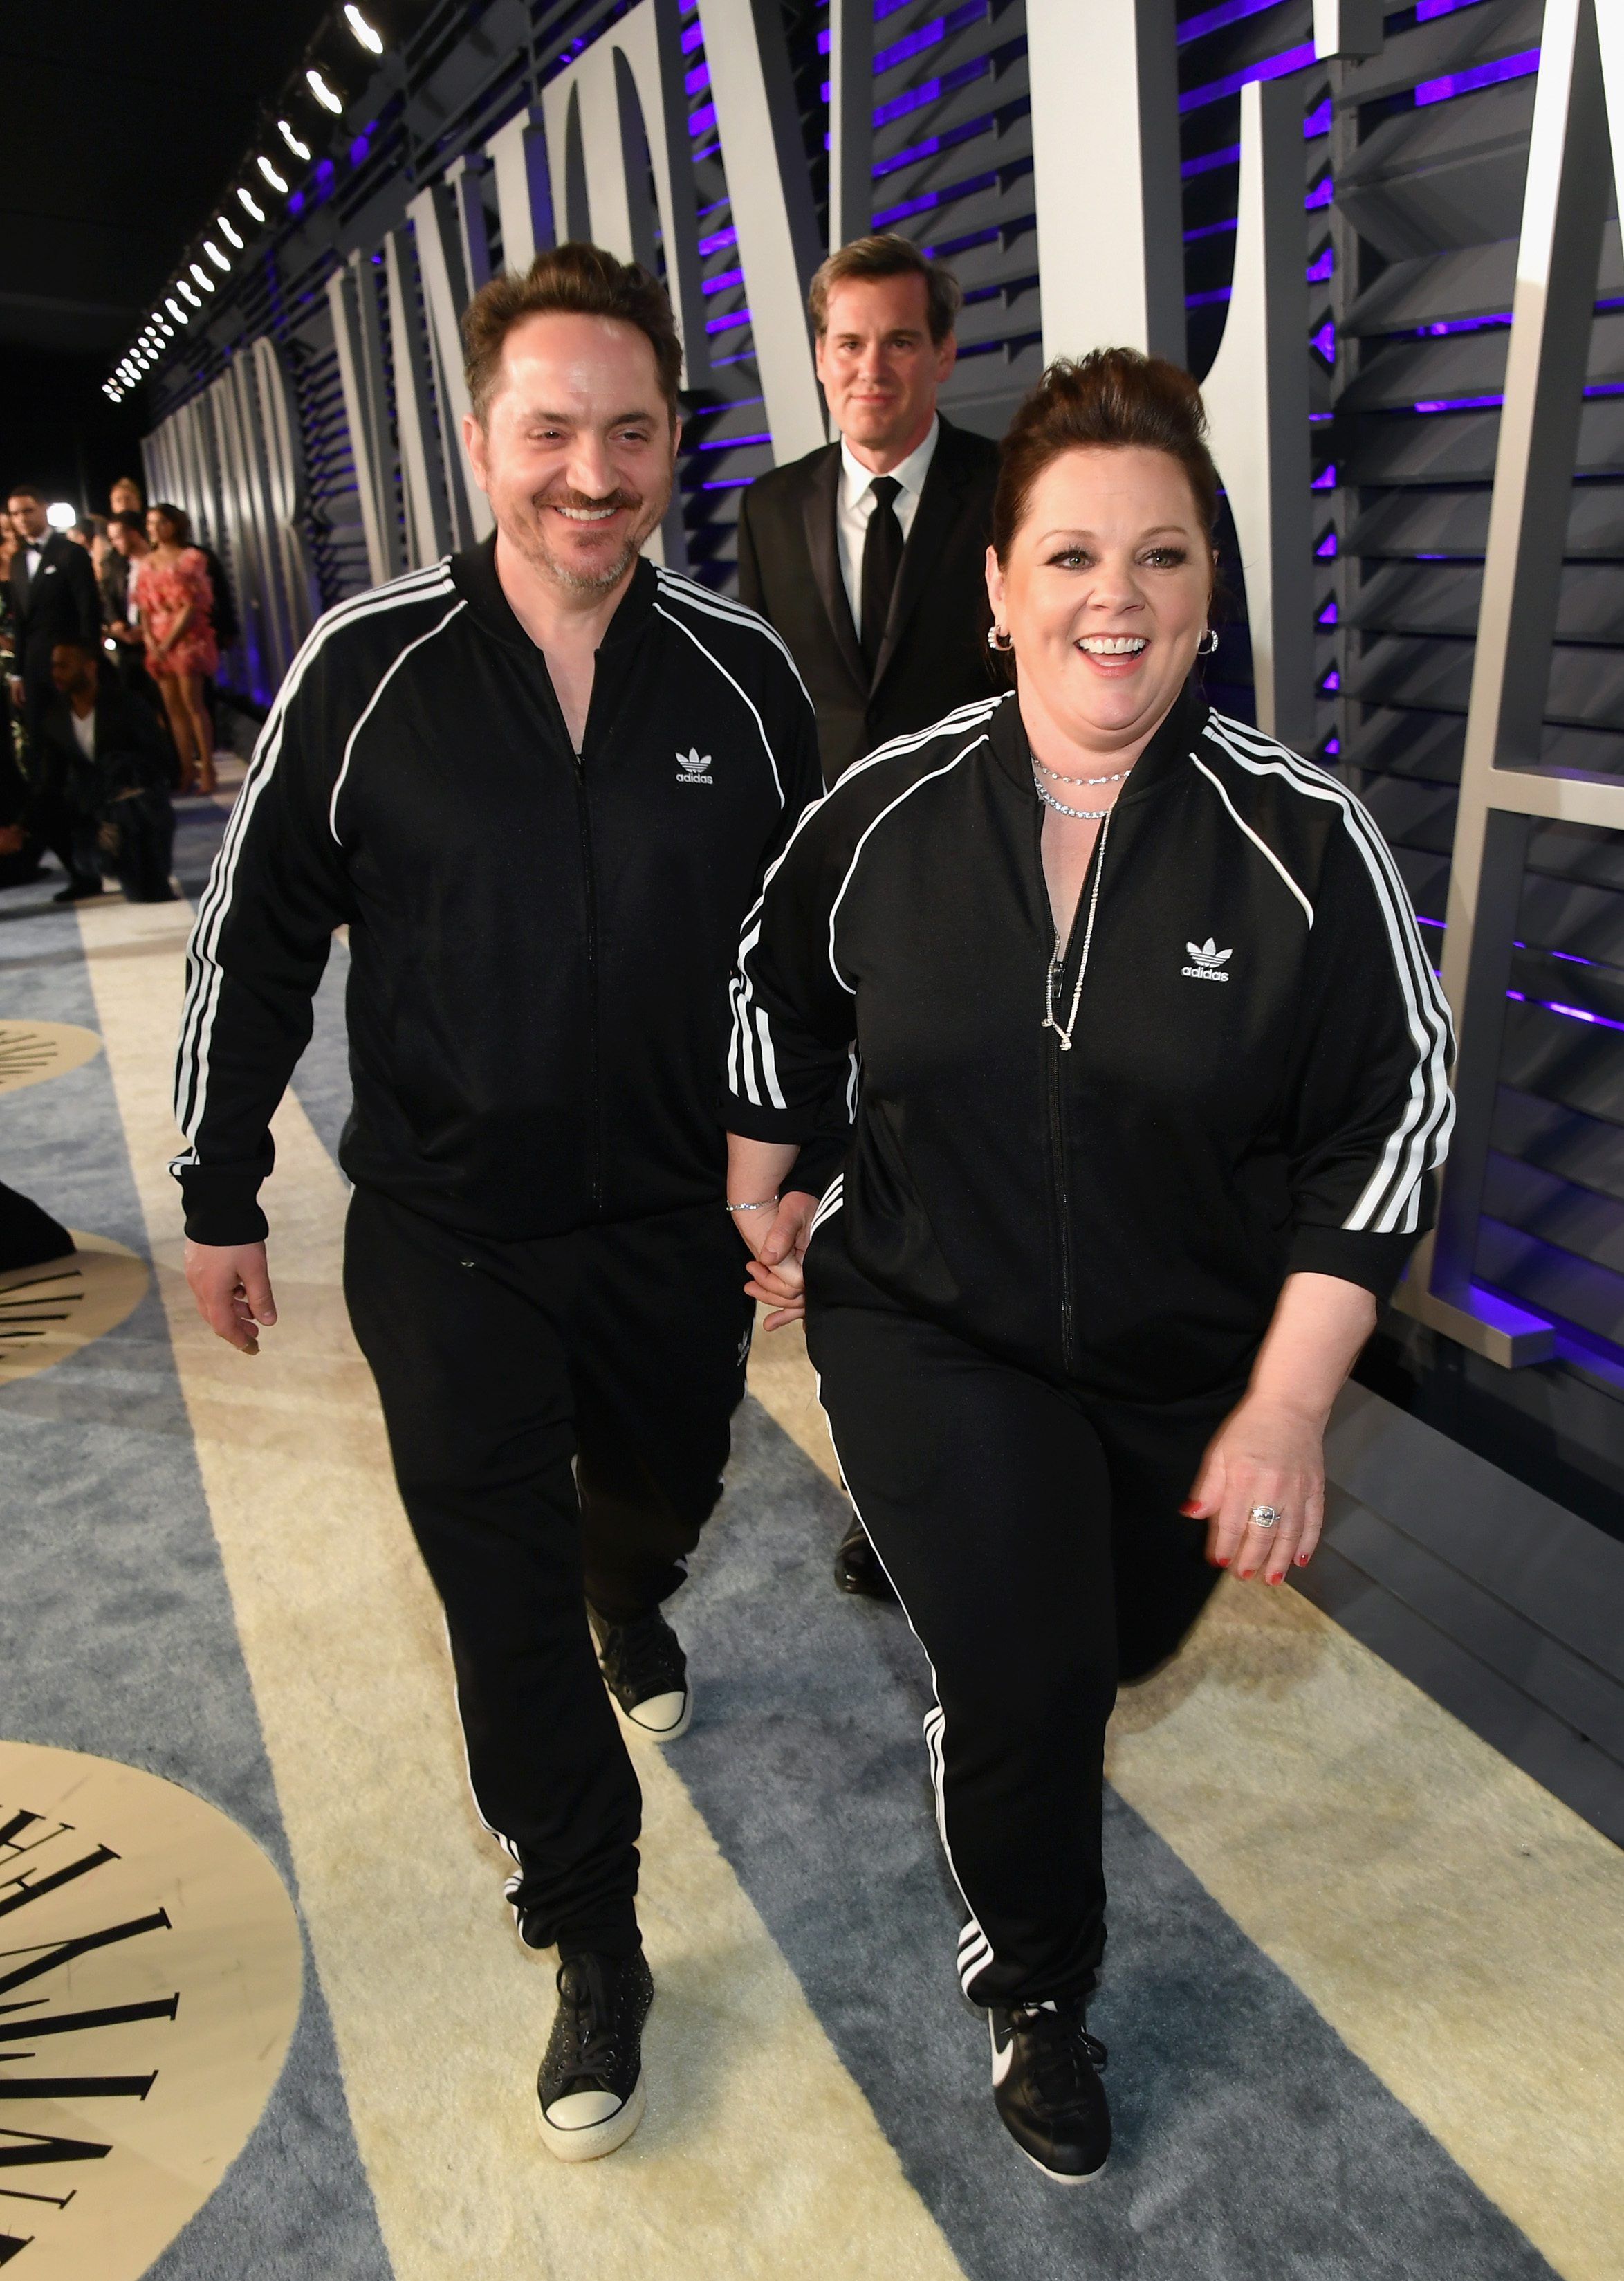 Ben Falcone (L) and Melissa McCarthy attend the 2019 Vanity Fair Oscar Party hosted by Radhika Jones at Wallis Annenberg Center for the Performing Arts on February 24, 2019, in Beverly Hills, California. | Source: Getty Images